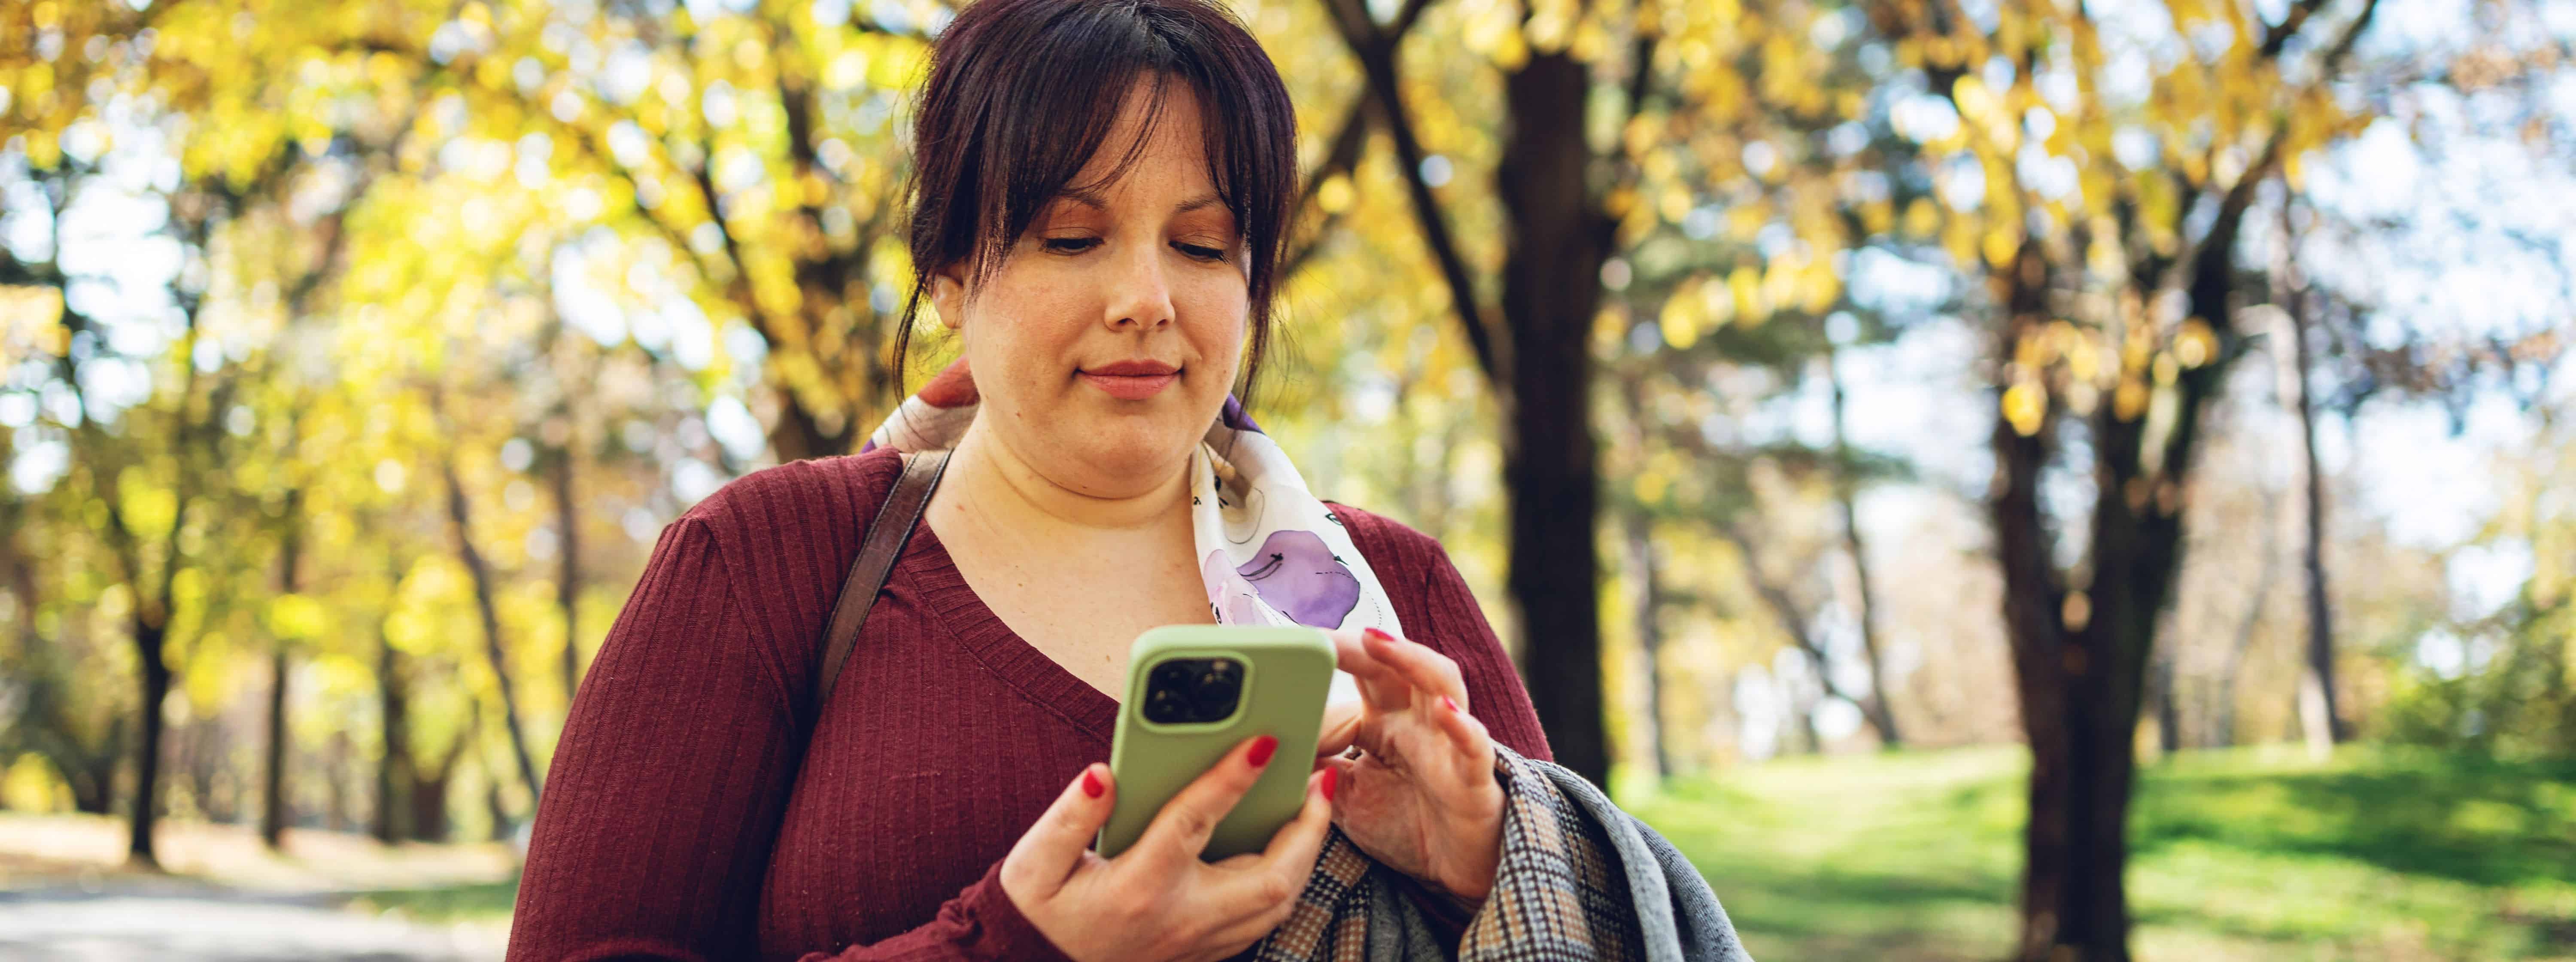 A woman with dark hair in a sweater using a smartphone in the park